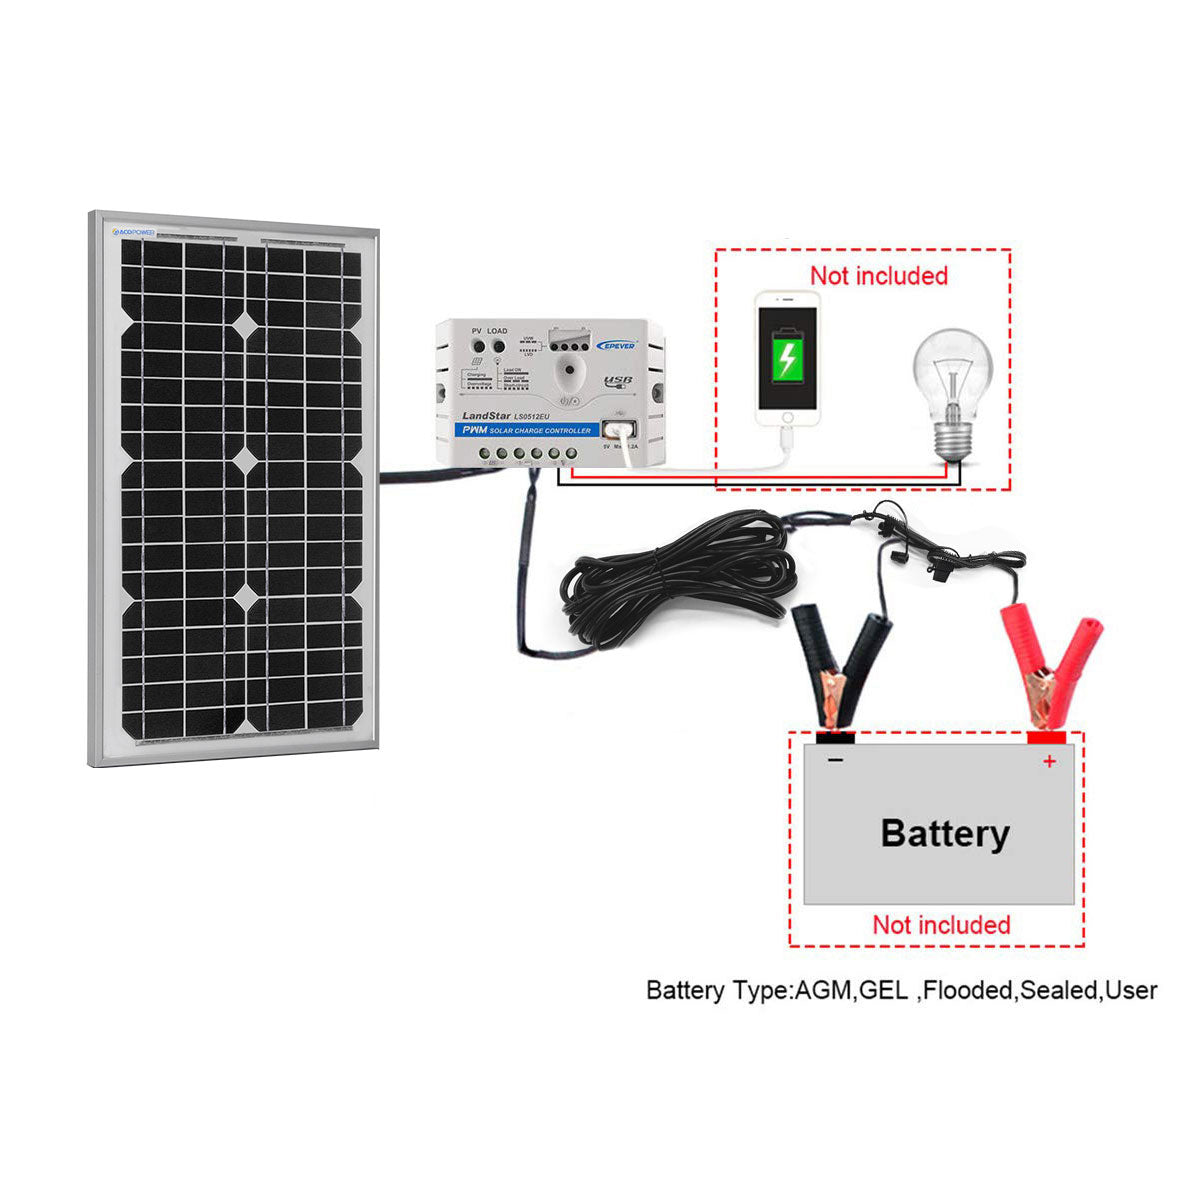 ACOPower 30W 12V Solar Charger Kit, 5A Charge Controller with Alligator Clips